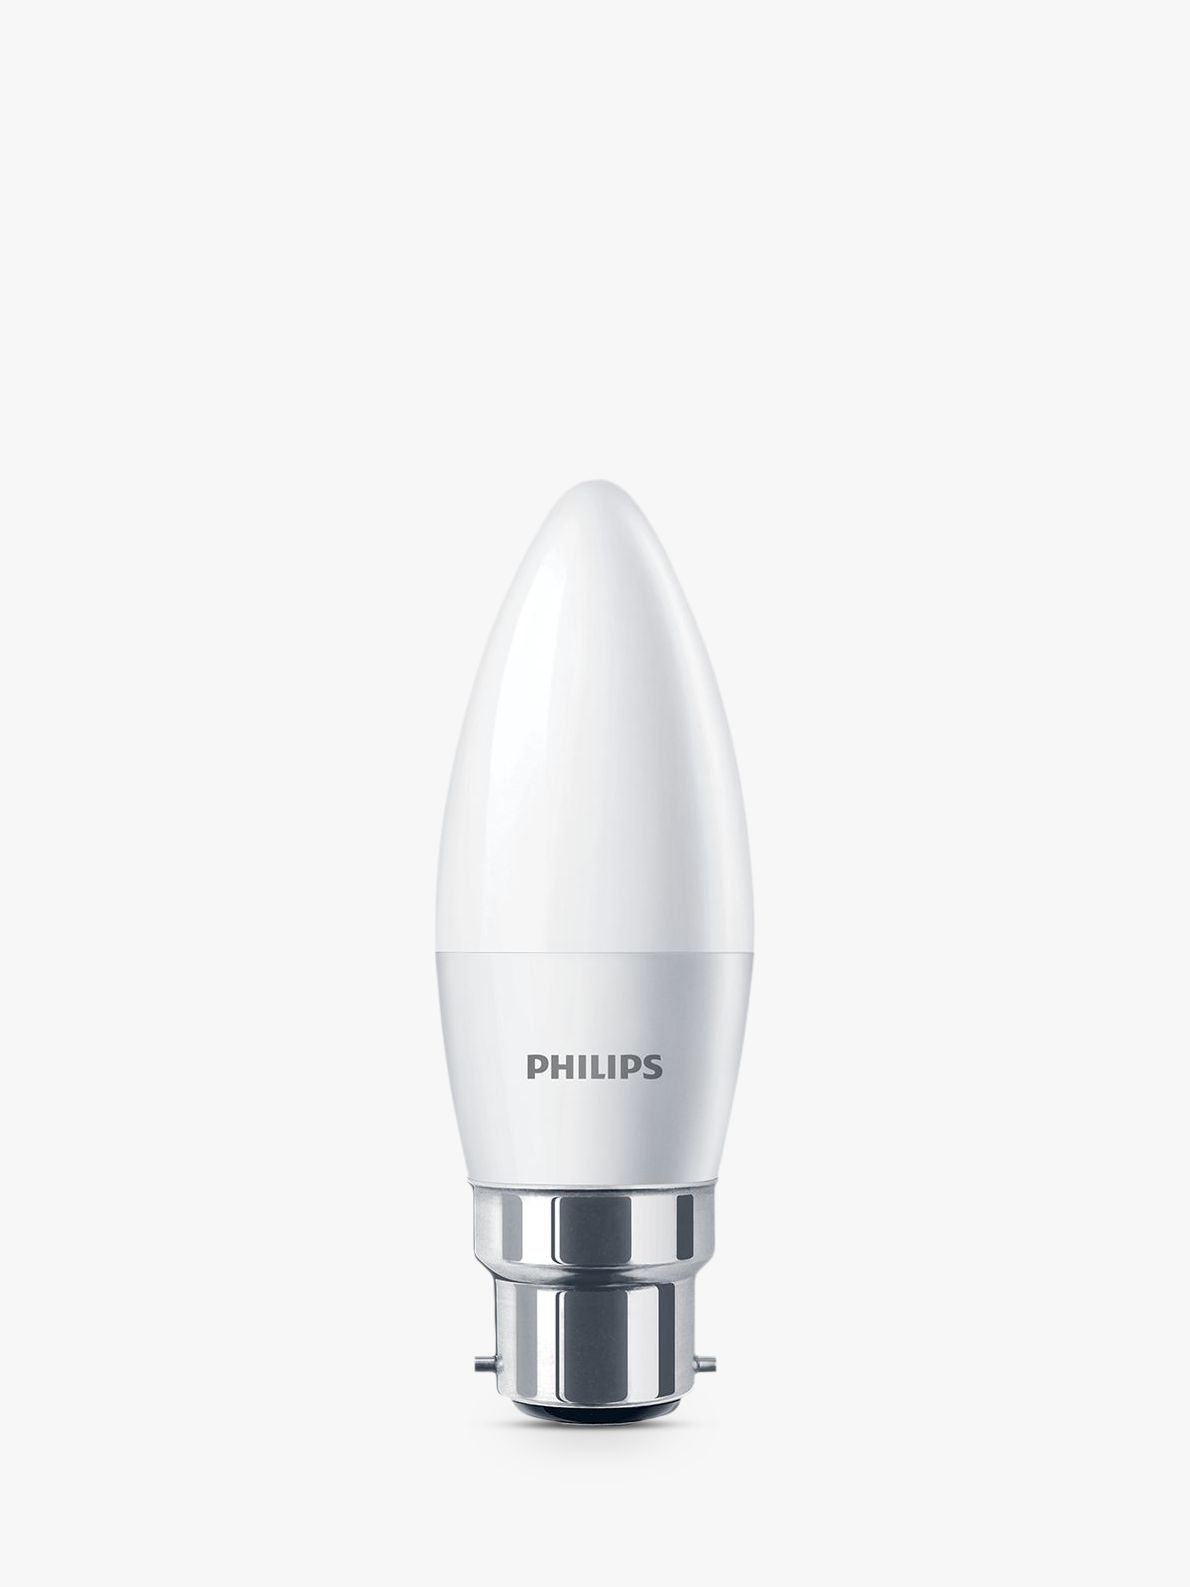 Philips 2.8W BC LED Candle Light Bulb, Frosted